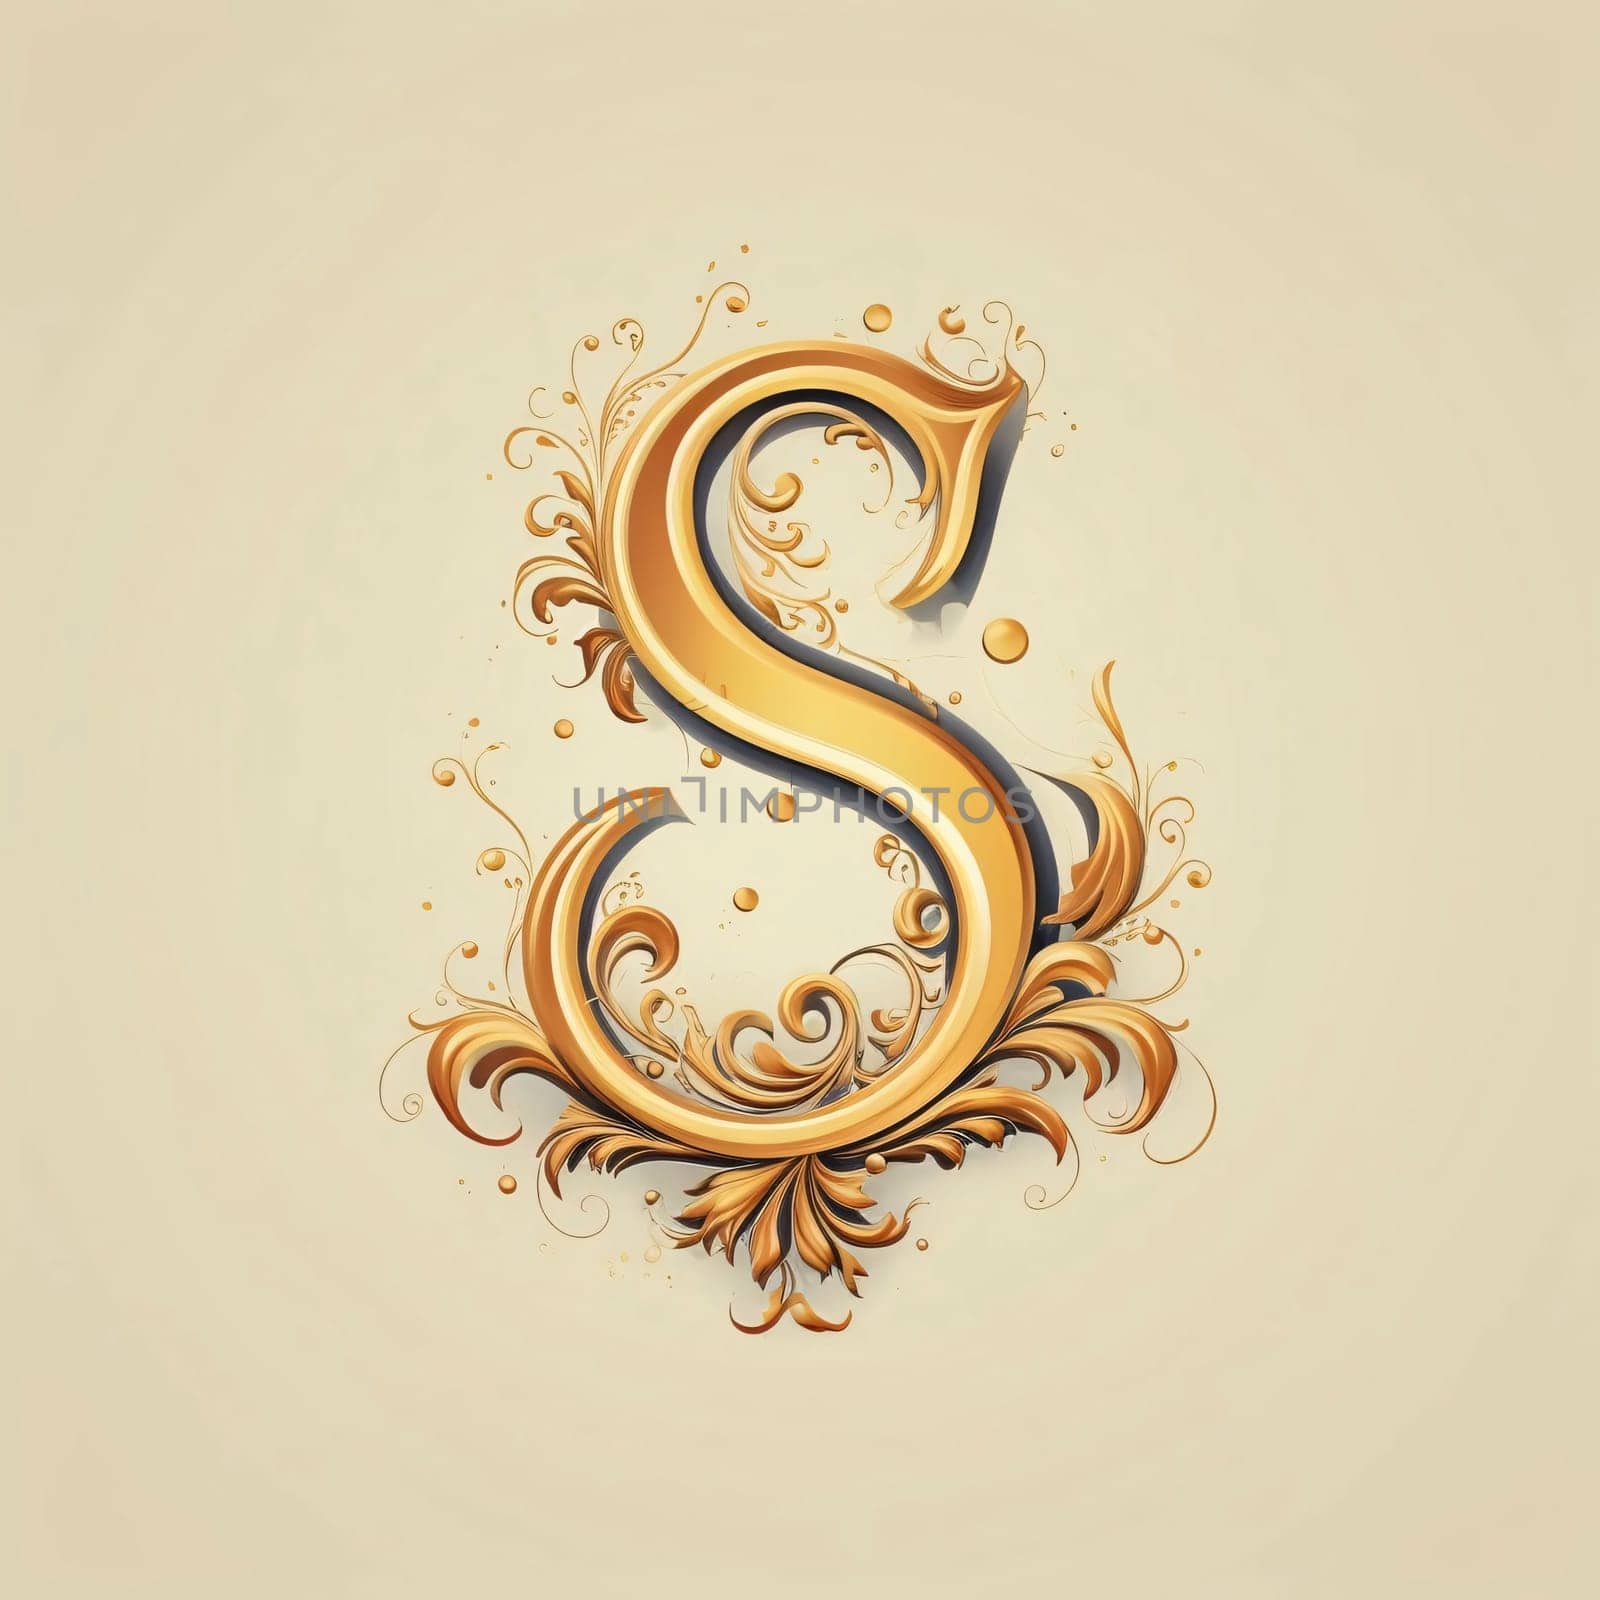 Graphic alphabet letters: Gold letter S in the style of Baroque. Vector illustration